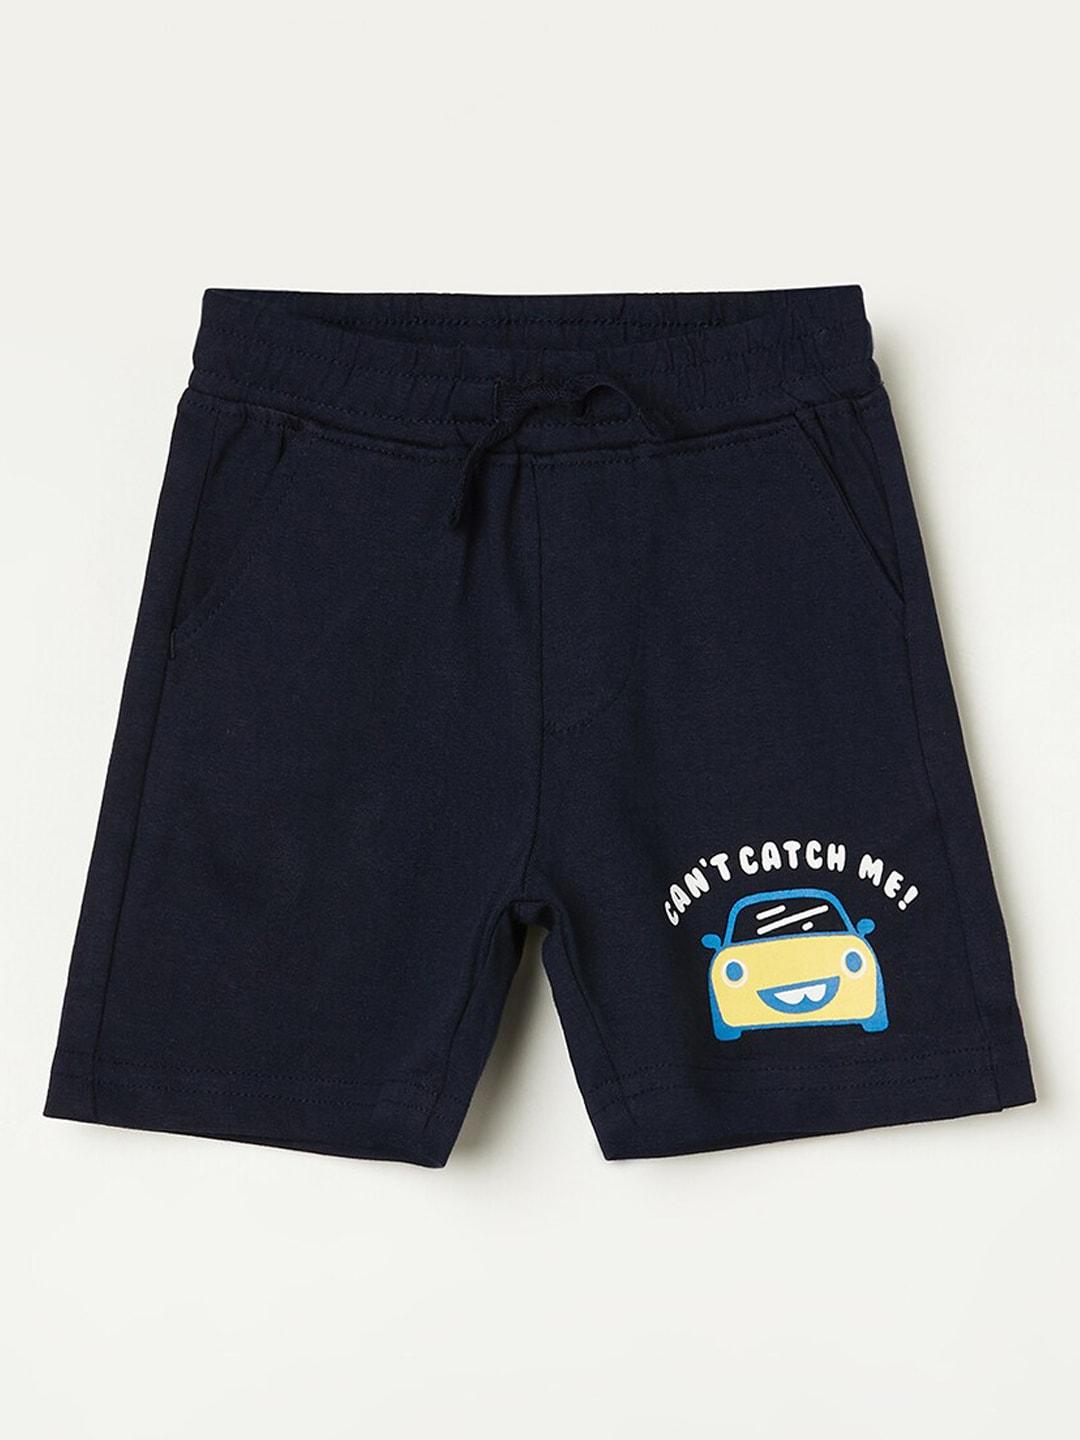 Juniors by Lifestyle Boys Blue Shorts